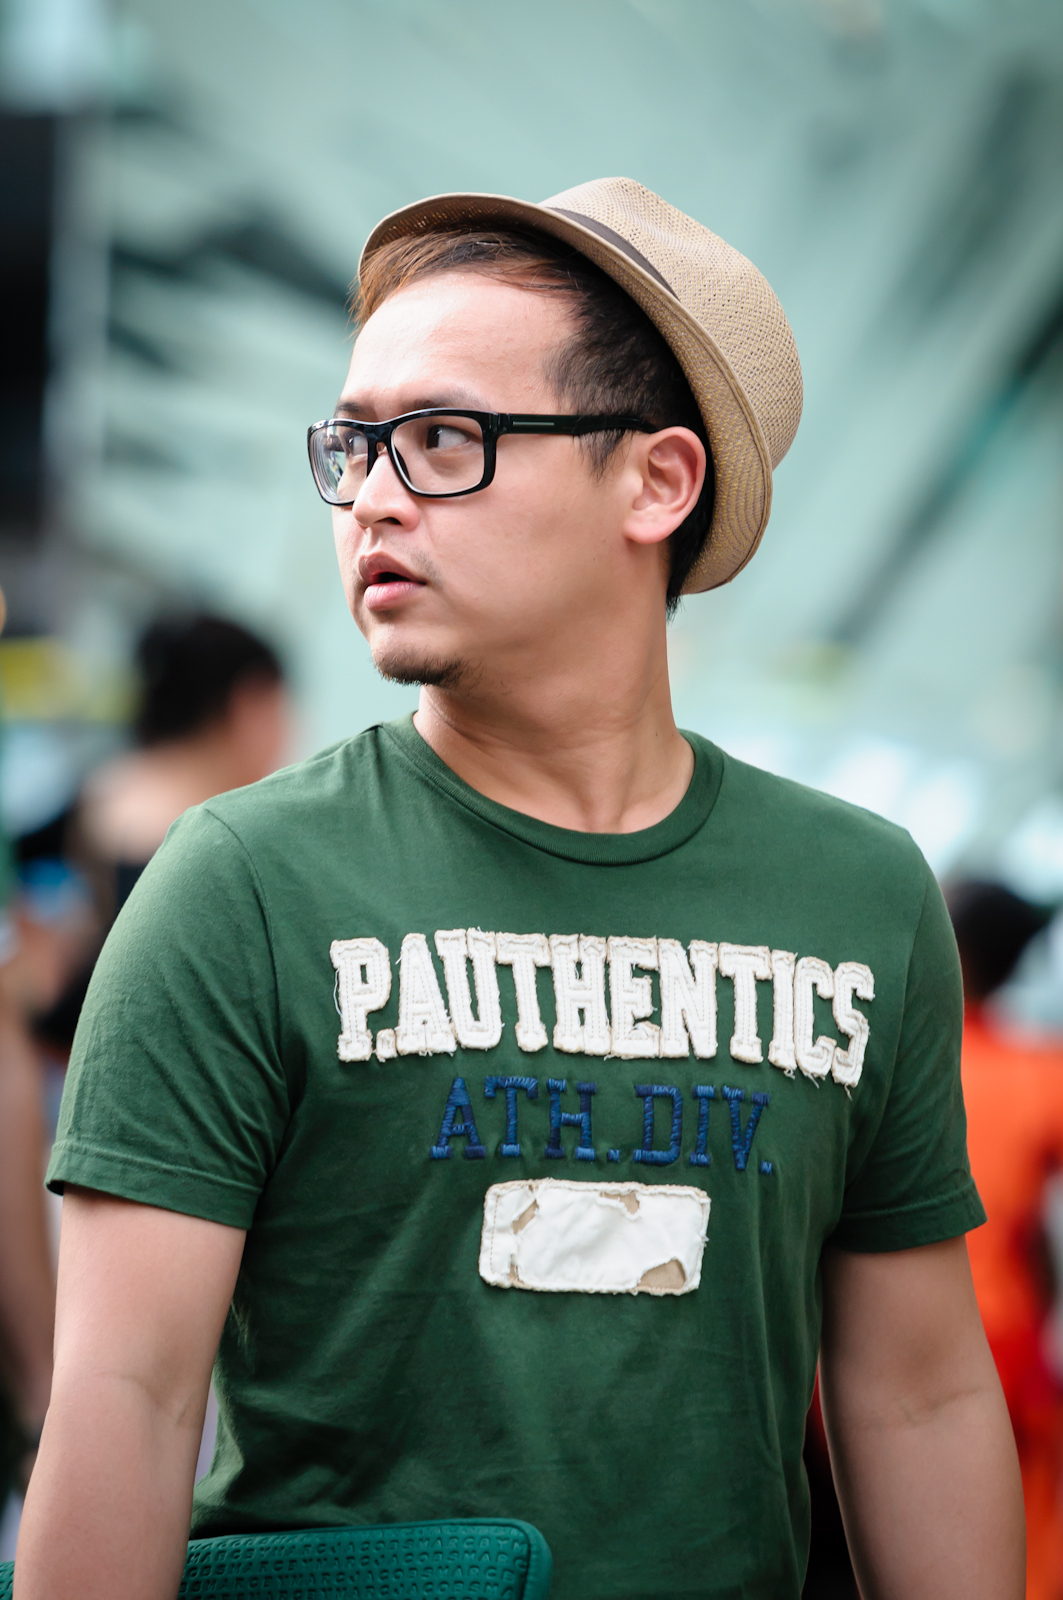 Street photography - Man wearing glasses and a hat